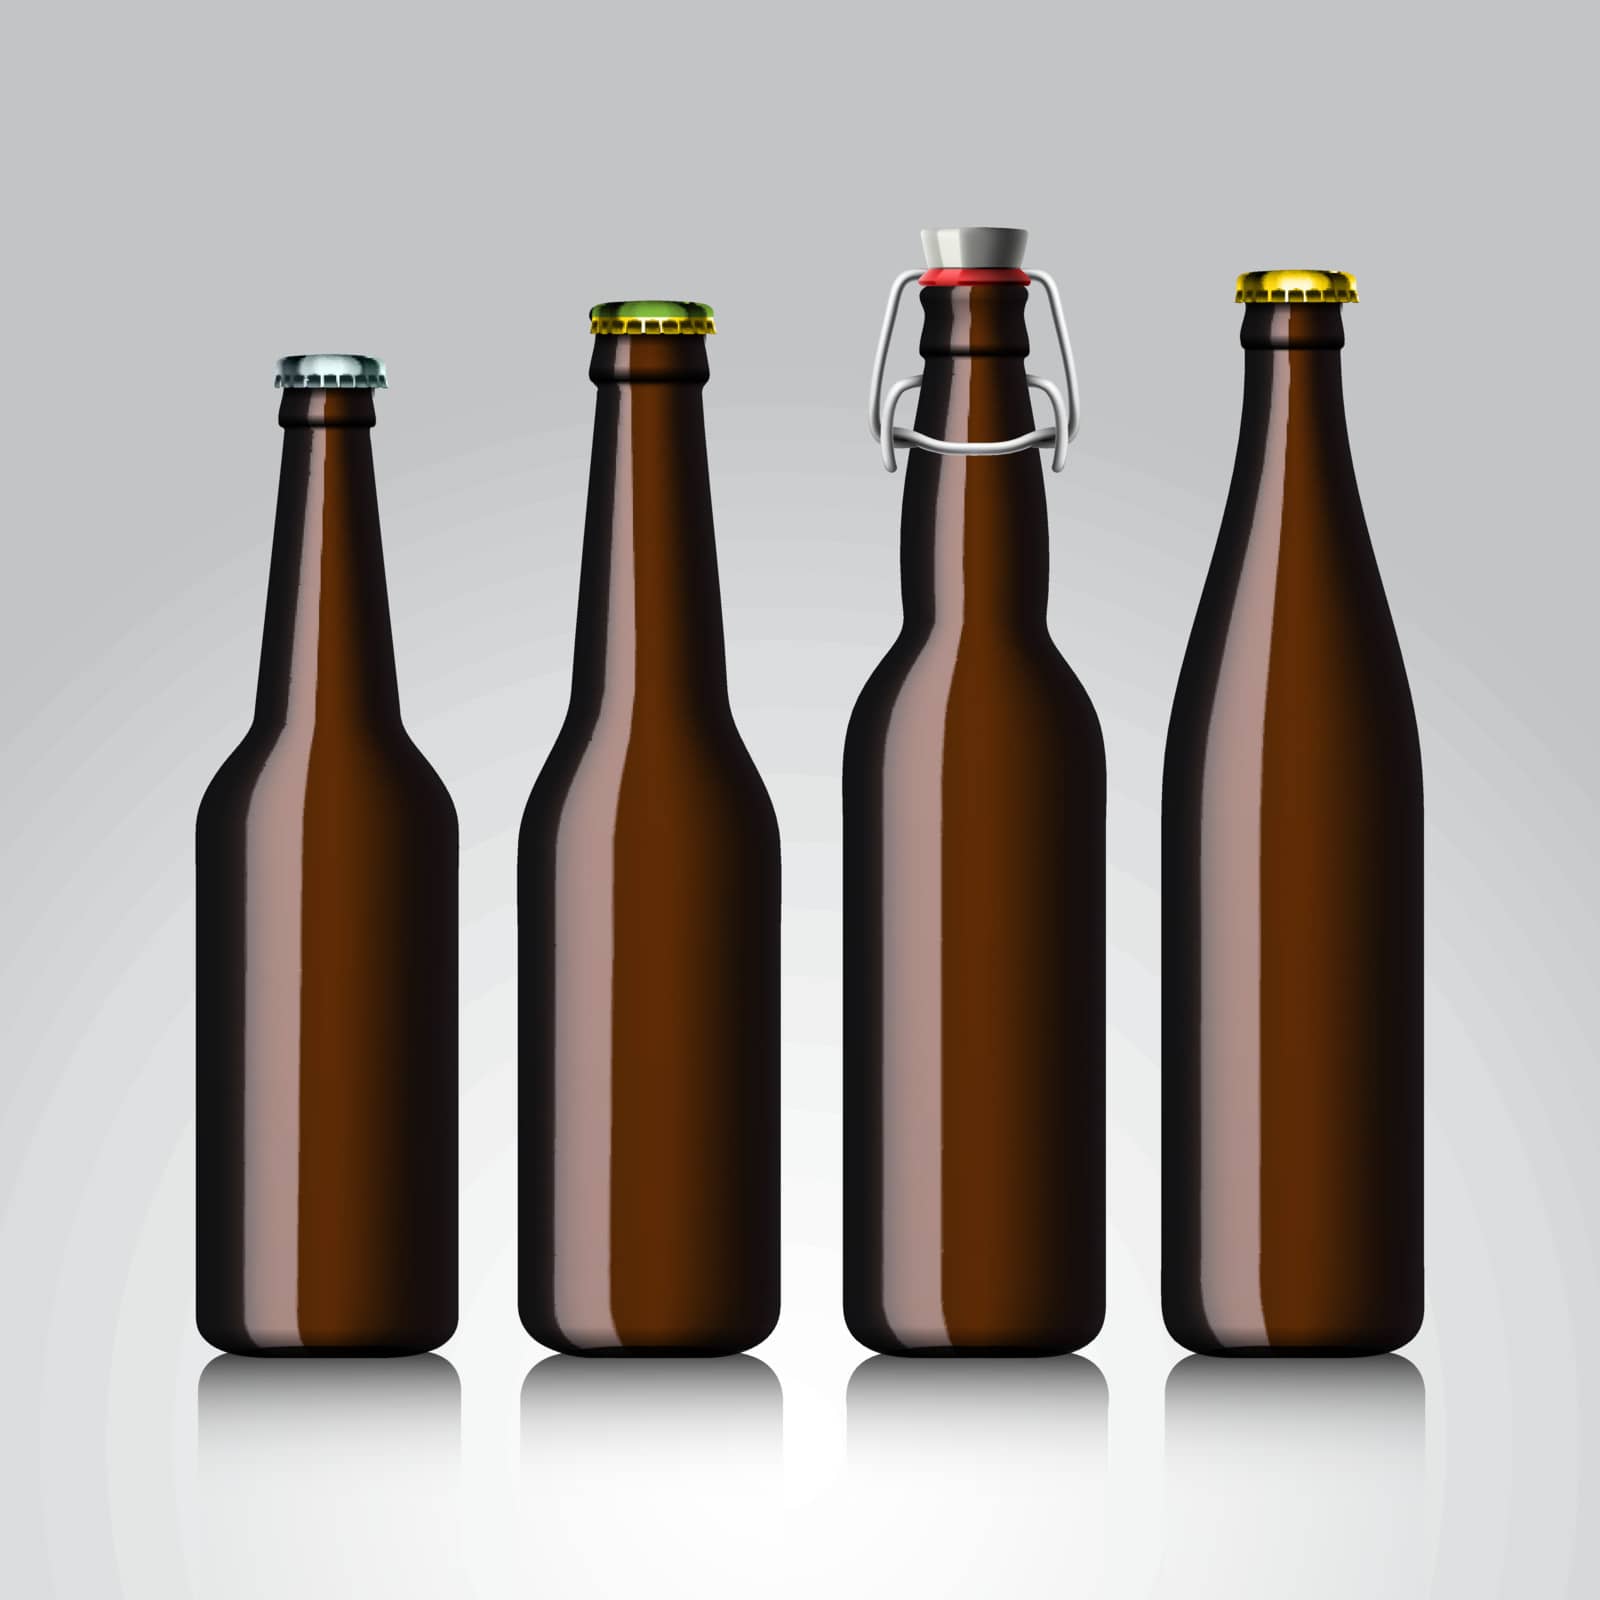 Beer bottle clear set with no label by ikopylov